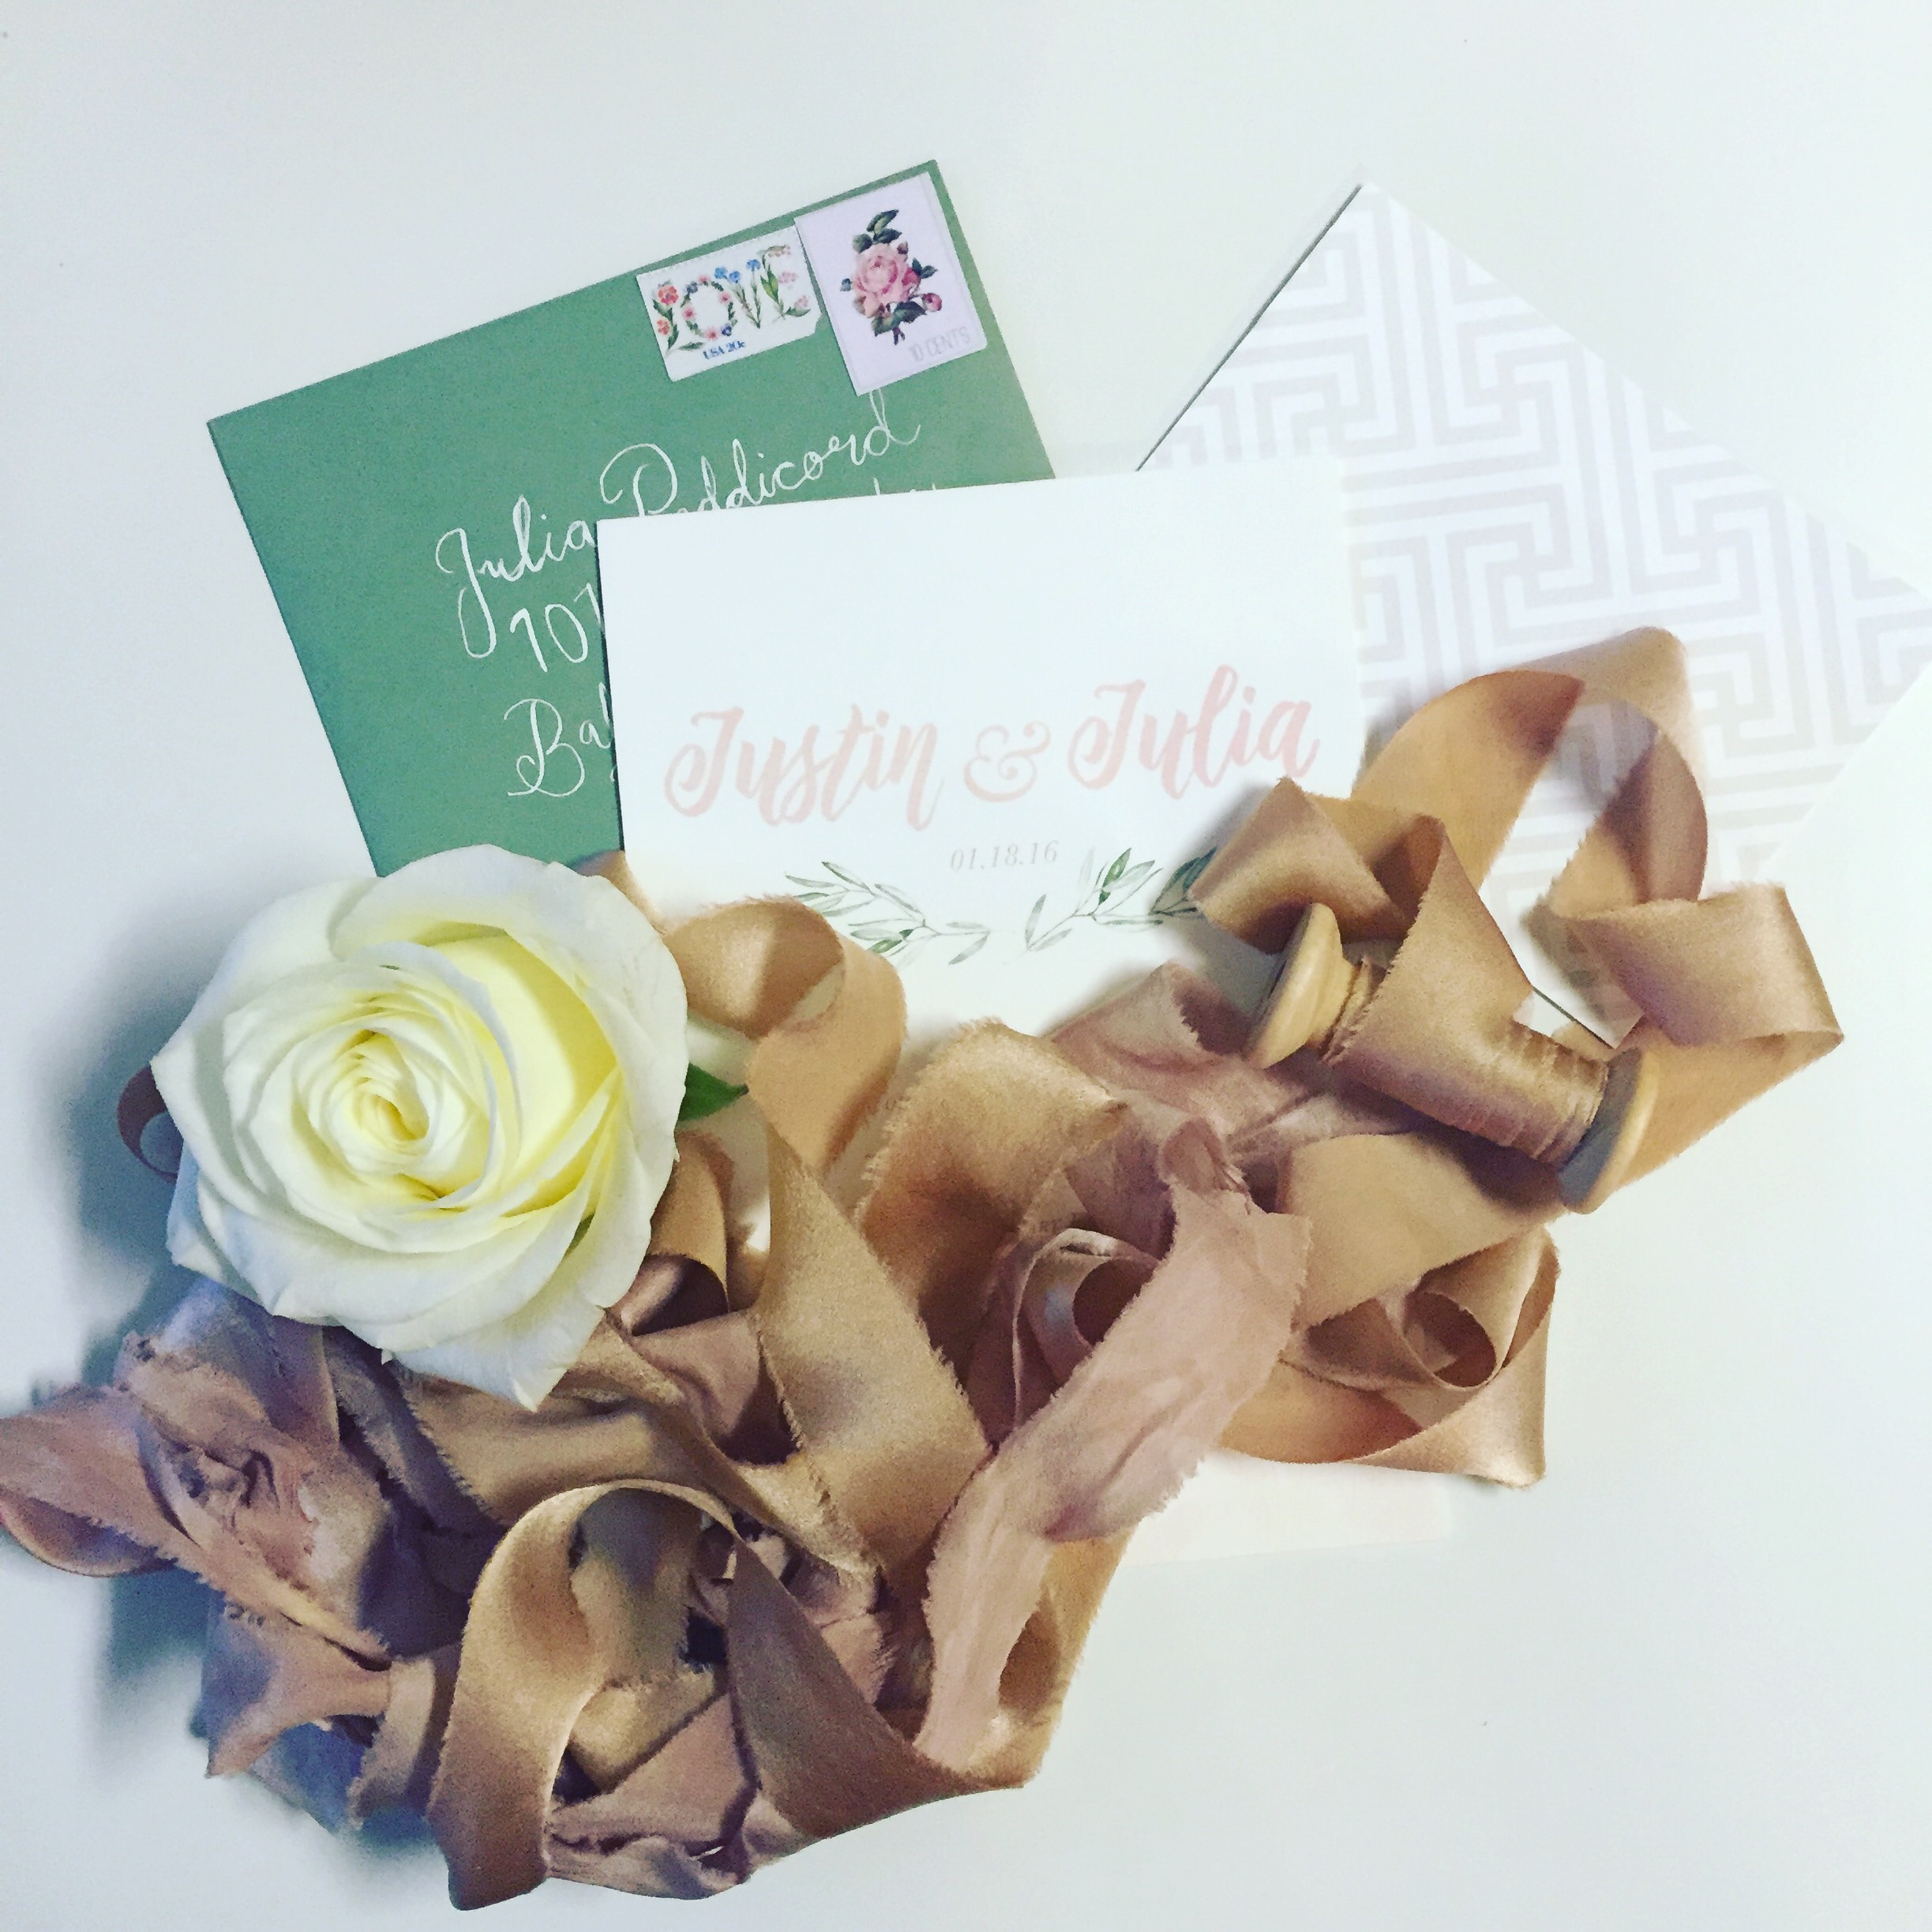   Invitation suite from our recent styled shoot by Ribbon and Ink and ribbon by Fleuropean!  